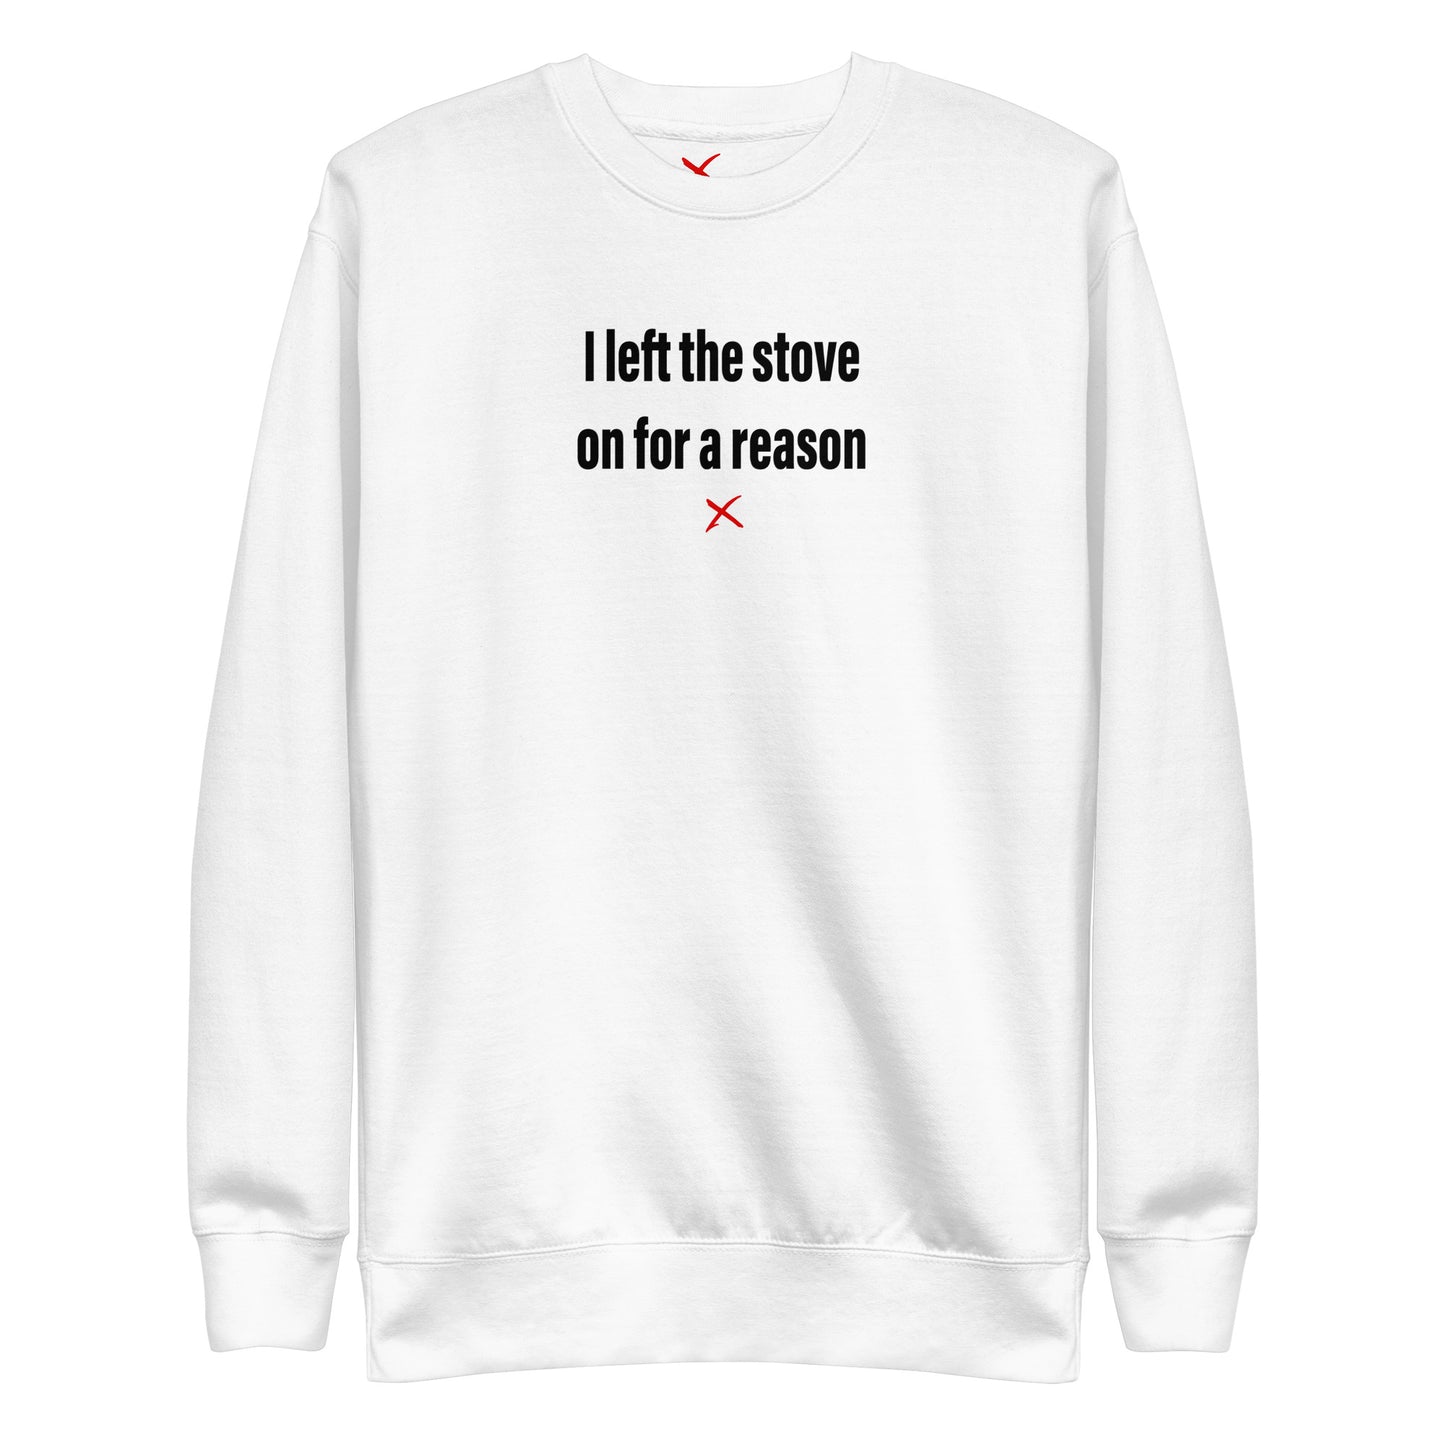 I left the stove on for a reason - Sweatshirt